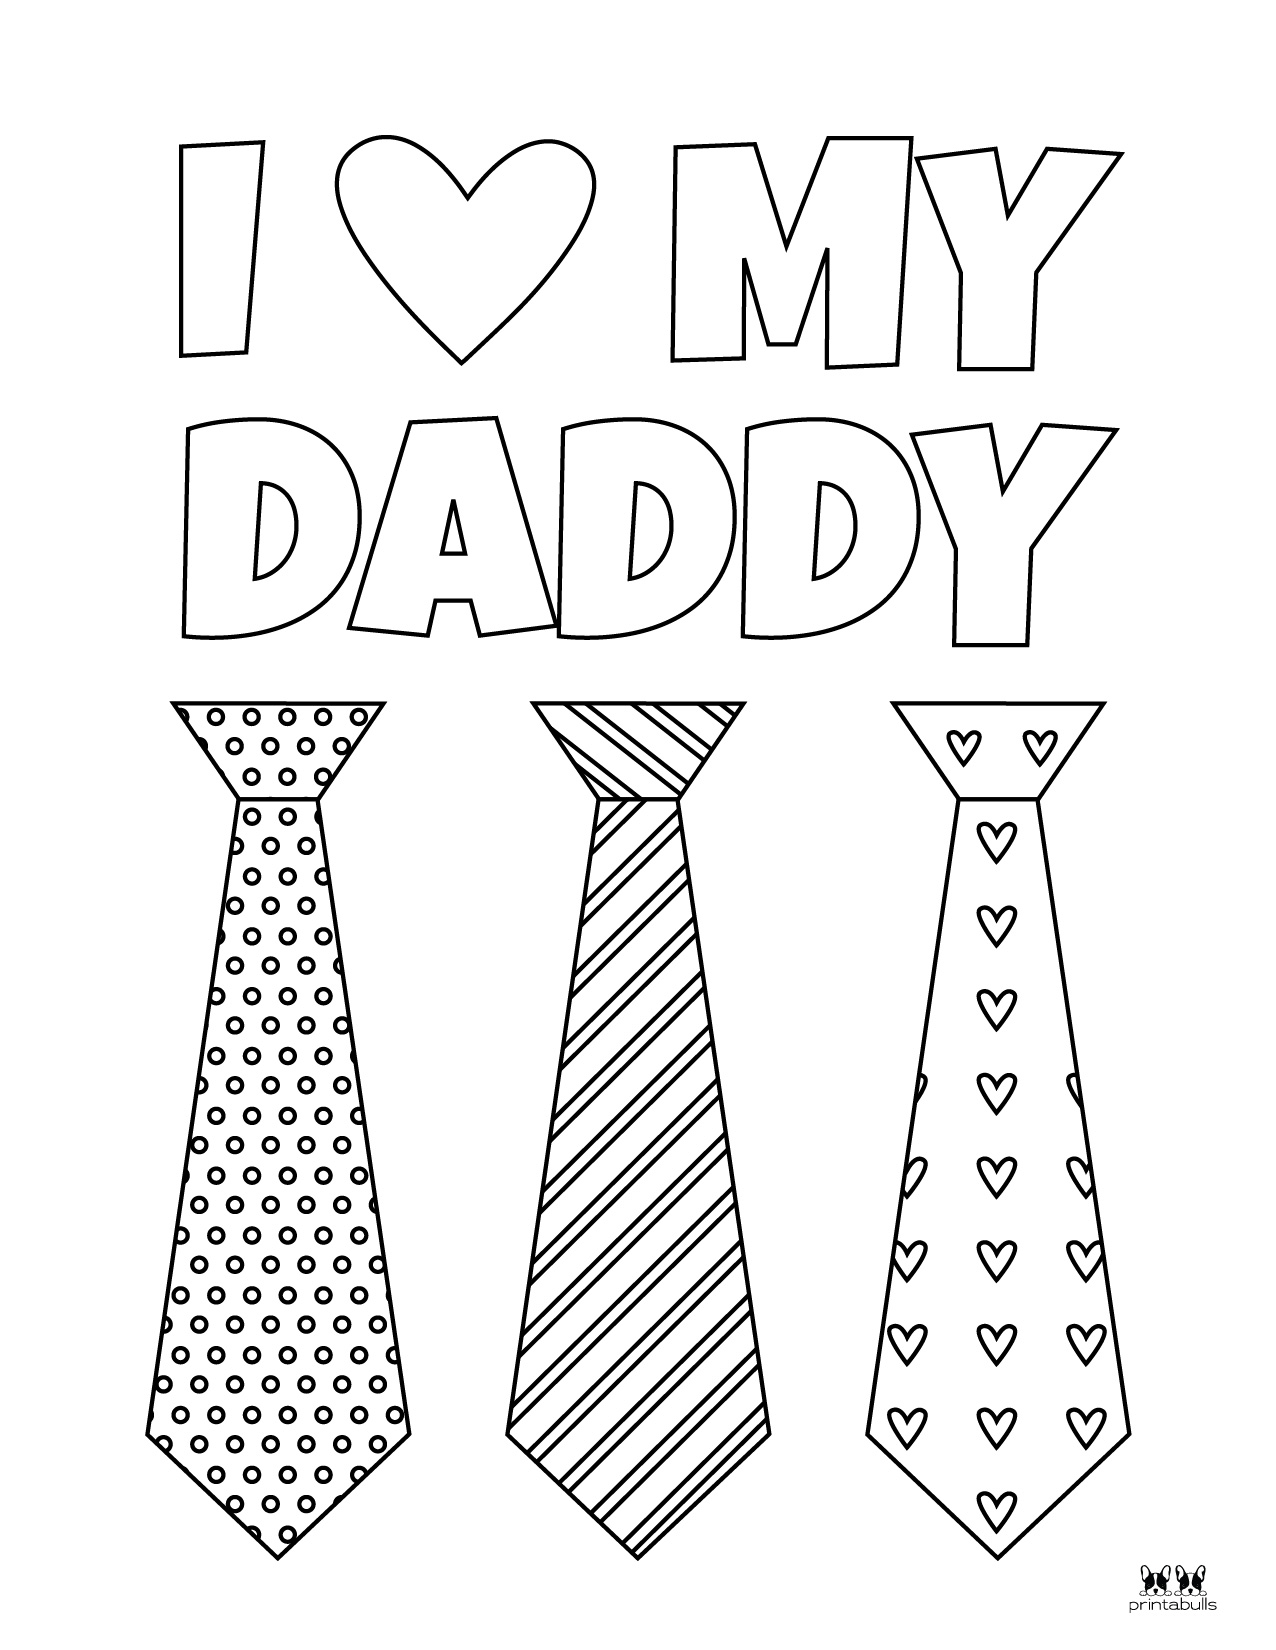 father-s-day-coloring-pages-10-free-pages-printabulls